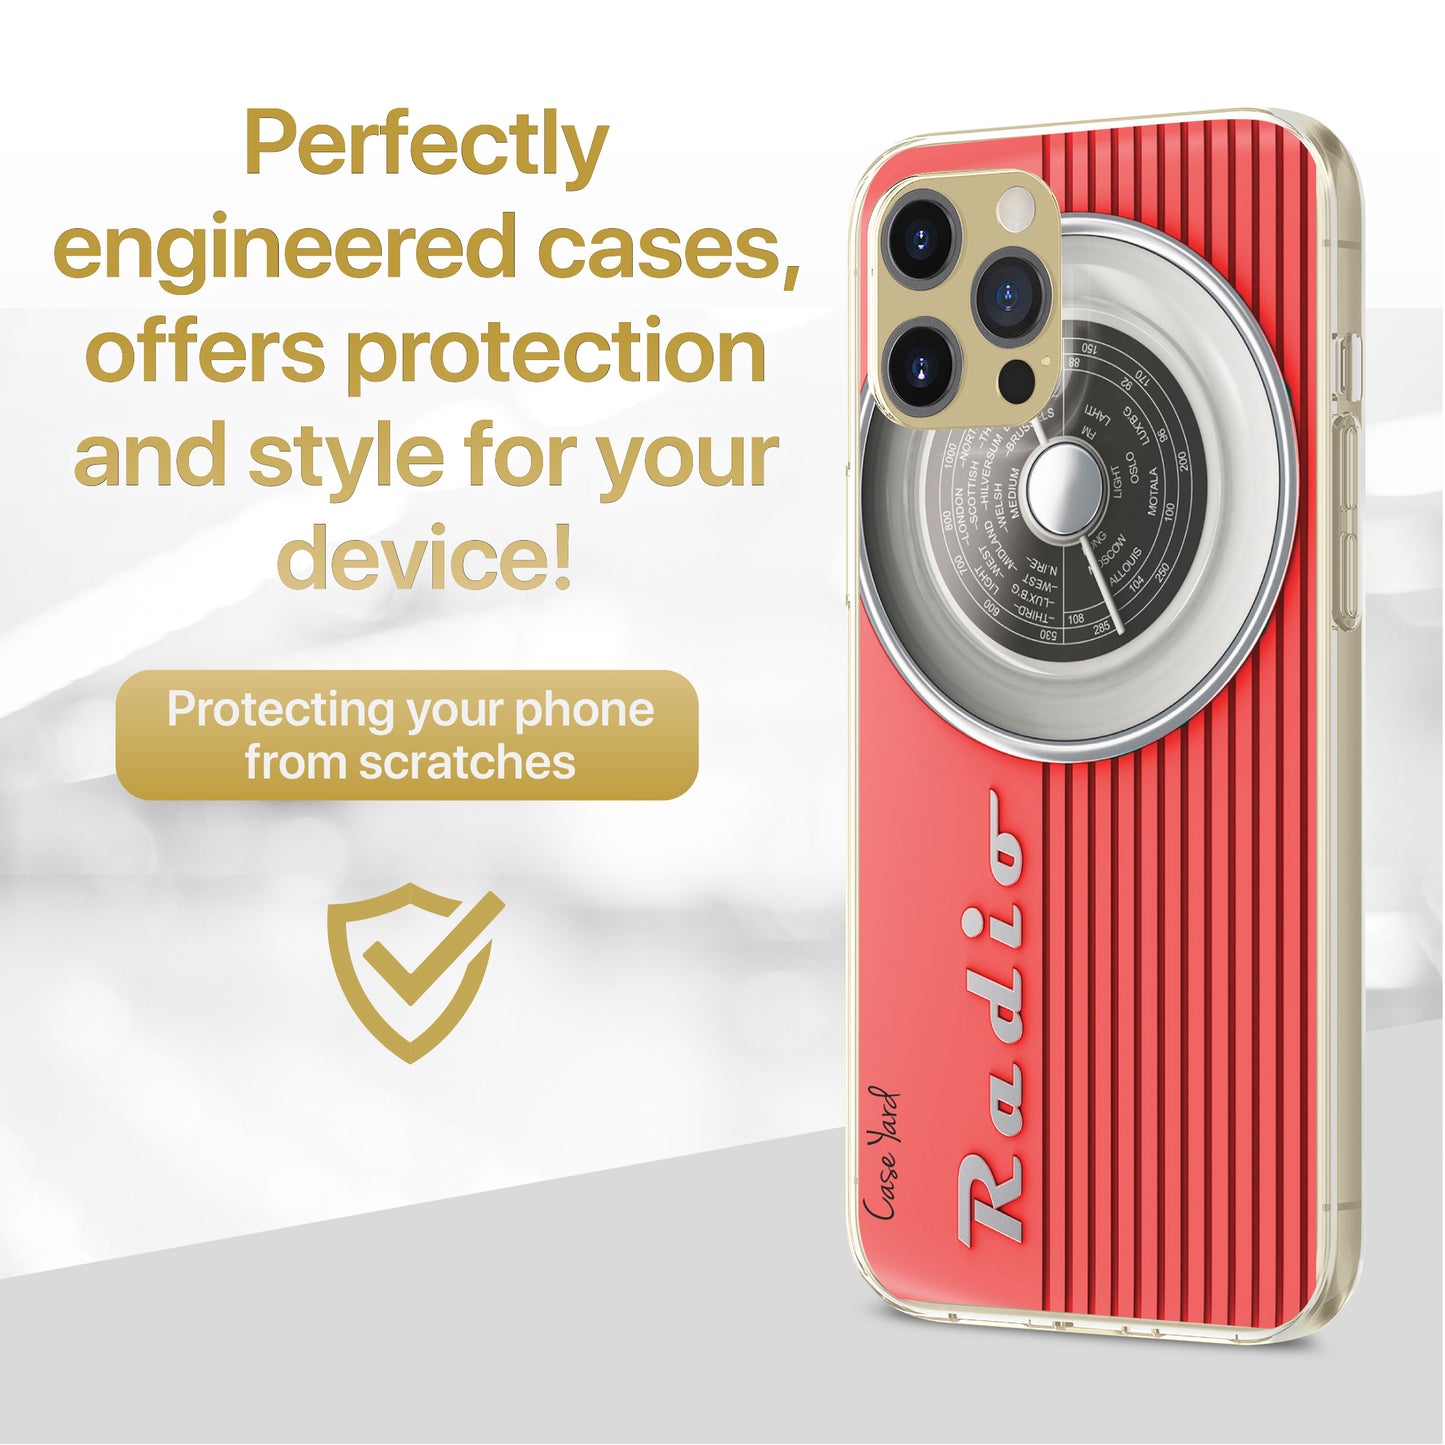 TPU Clear case with (Radio) Design for iPhone & Samsung Phones